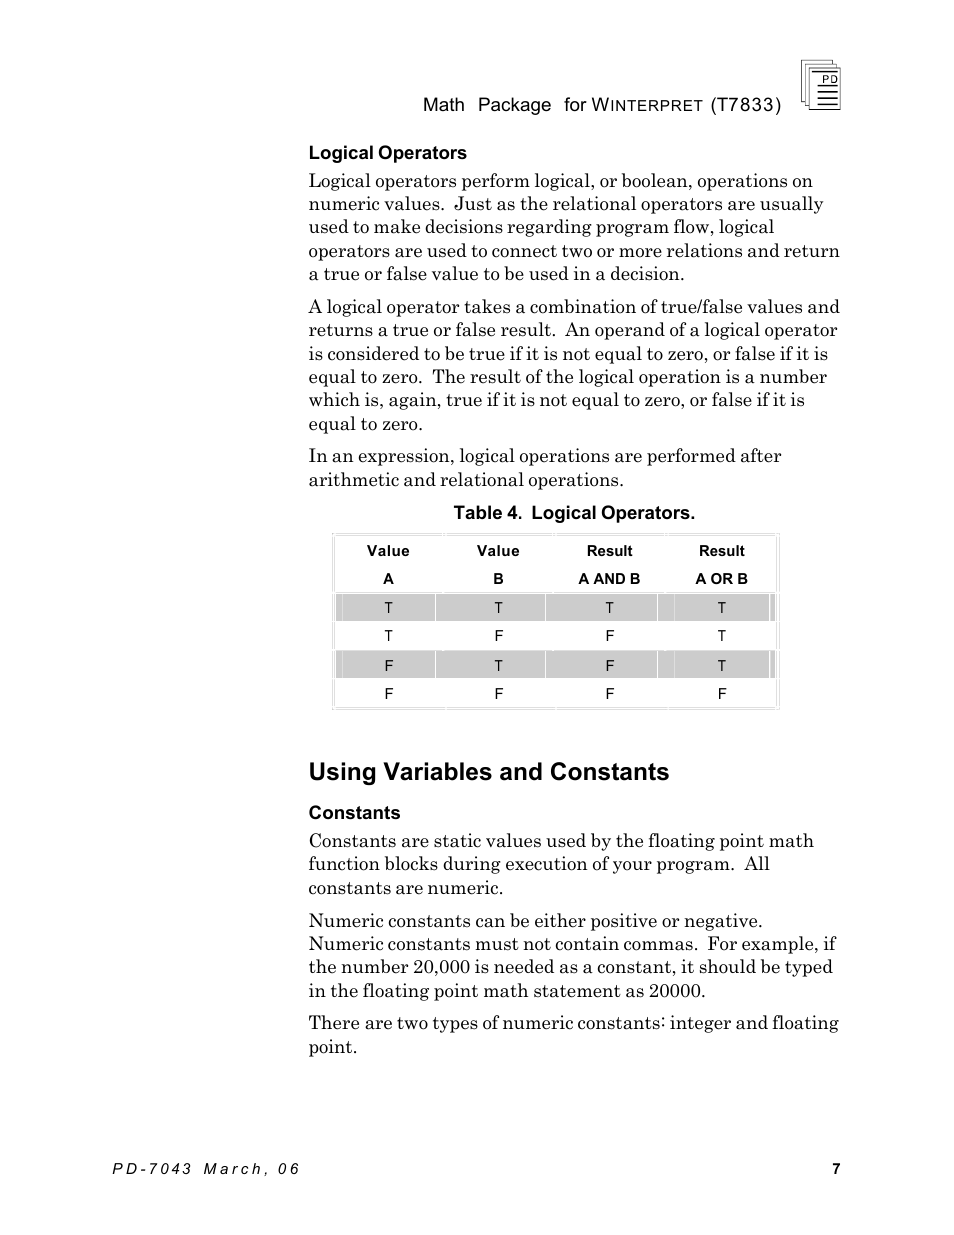 Using variables and constants | Rockwell Automation T7833 ICS Regent+Plus Math Package for Winternet User Manual | Page 7 / 26